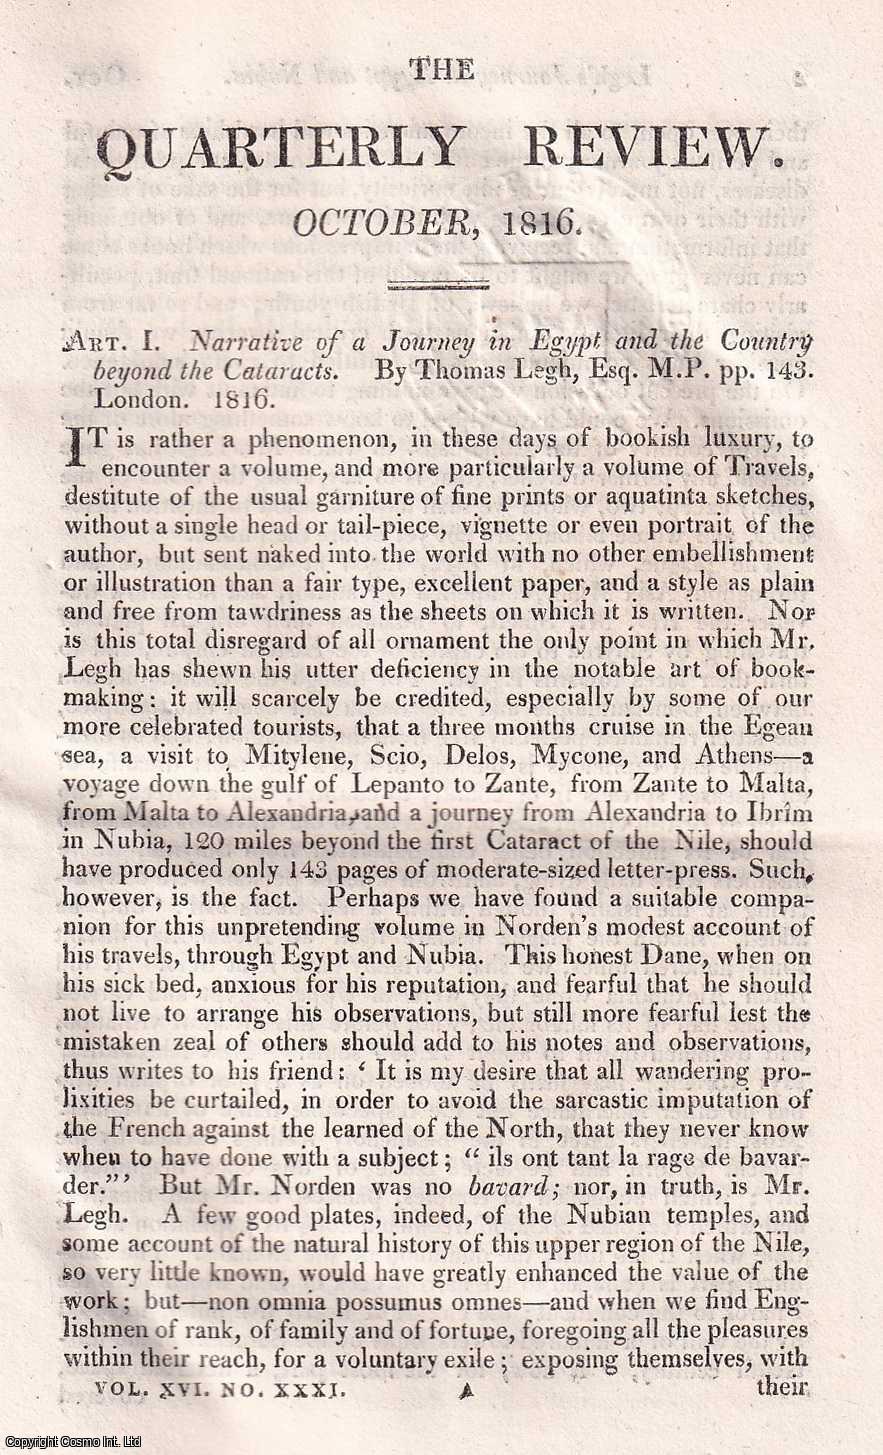 John Barrow - Legh's Narrative of a Journey in Egypt and Nubia. An uncommon original article from The Quarterly Review, 1816.